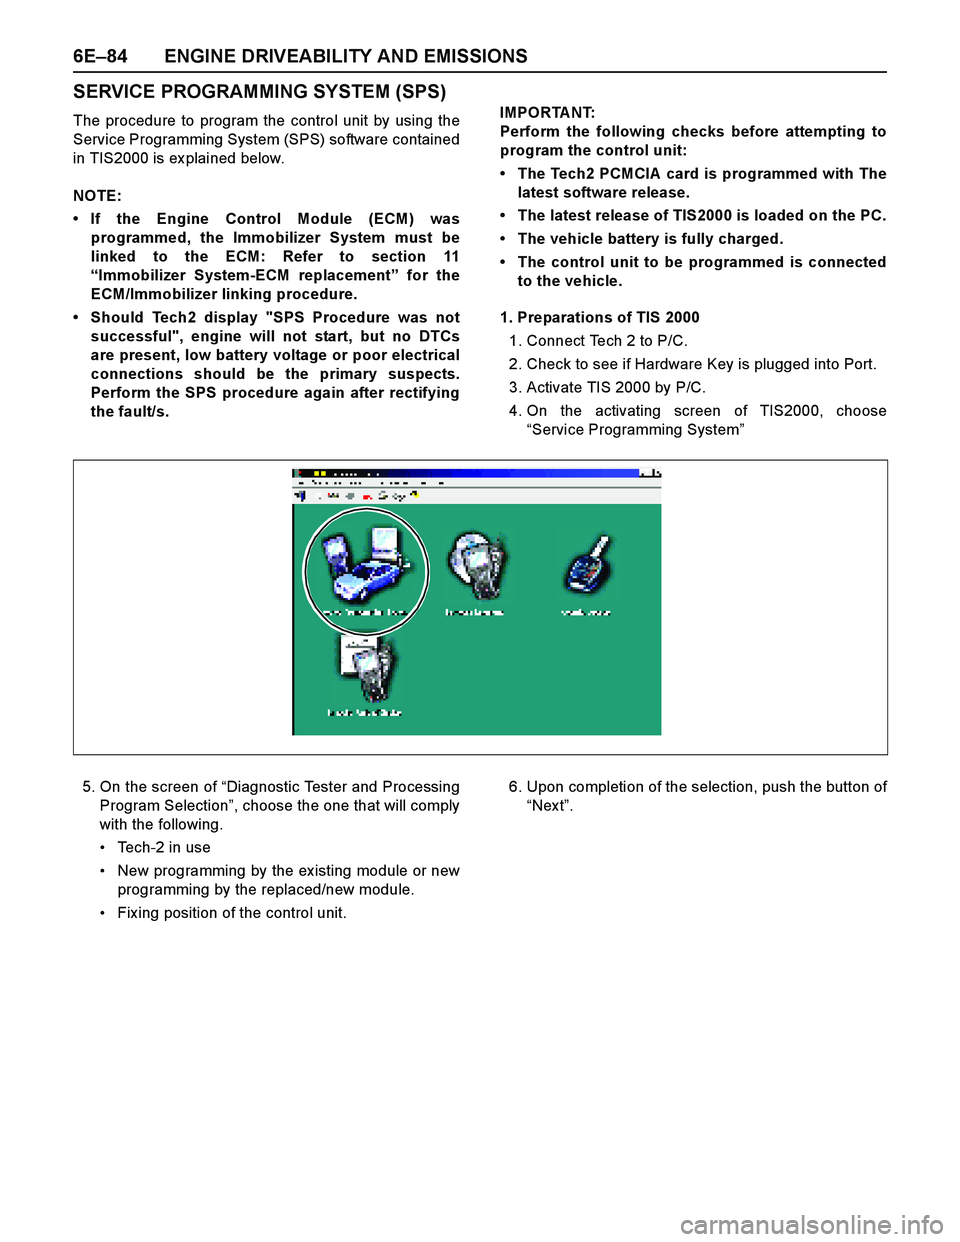 ISUZU TF SERIES 2004  Workshop Manual 6E–84 ENGINE DRIVEABILITY AND EMISSIONS
SERVICE PROGRAMMING SYSTEM (SPS)
The procedure to program the control unit by using the
Service Programming System (SPS) software contained
in TIS2000 is ex p